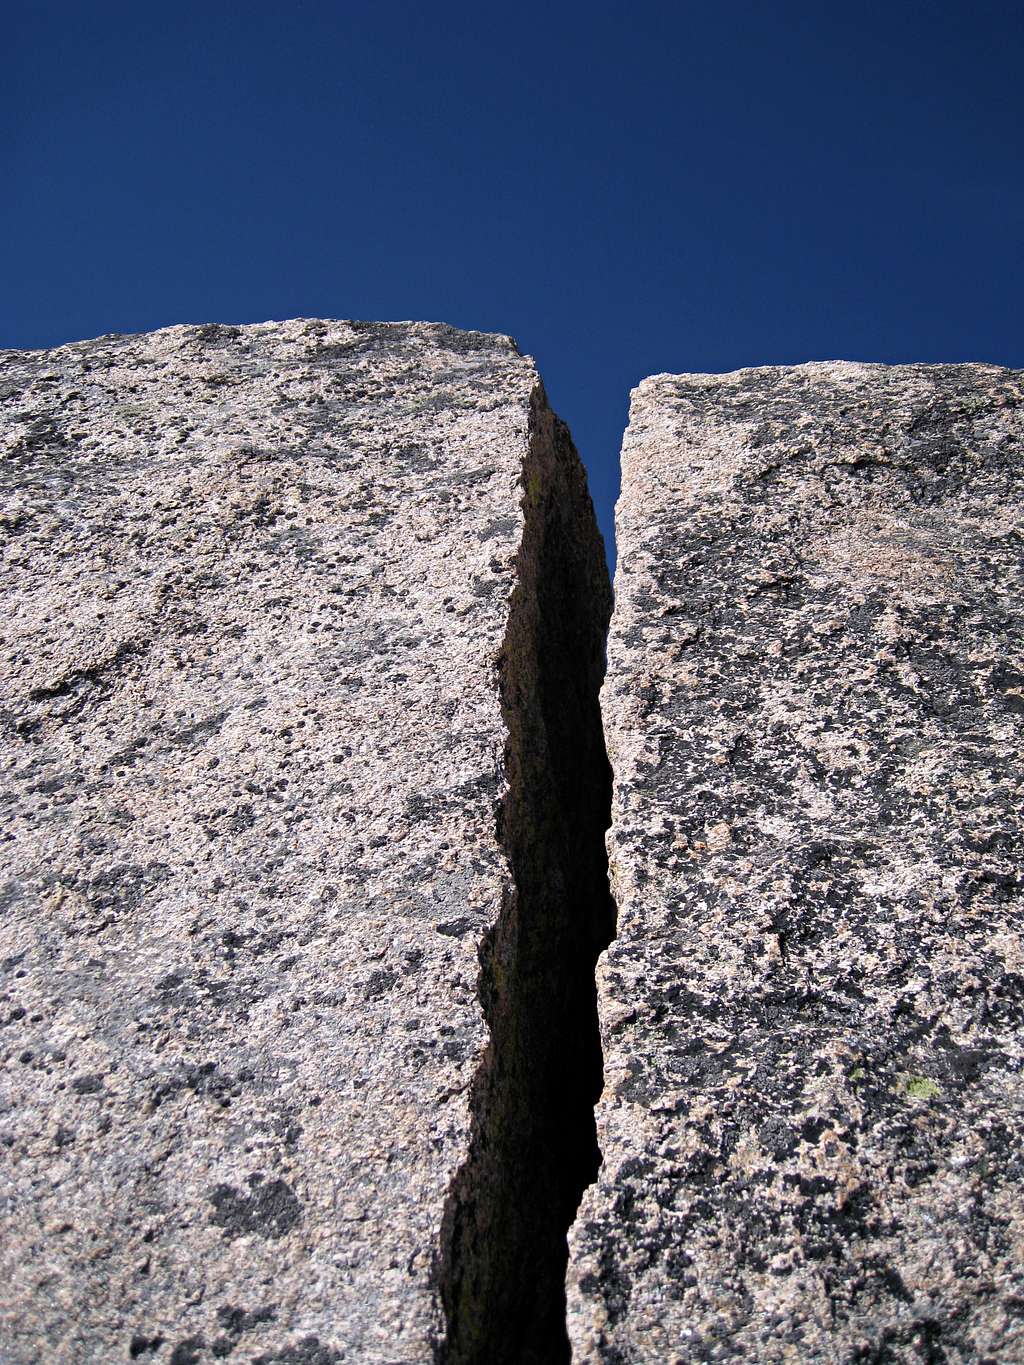 Off-widht crack leading to the summit of the Second Tower